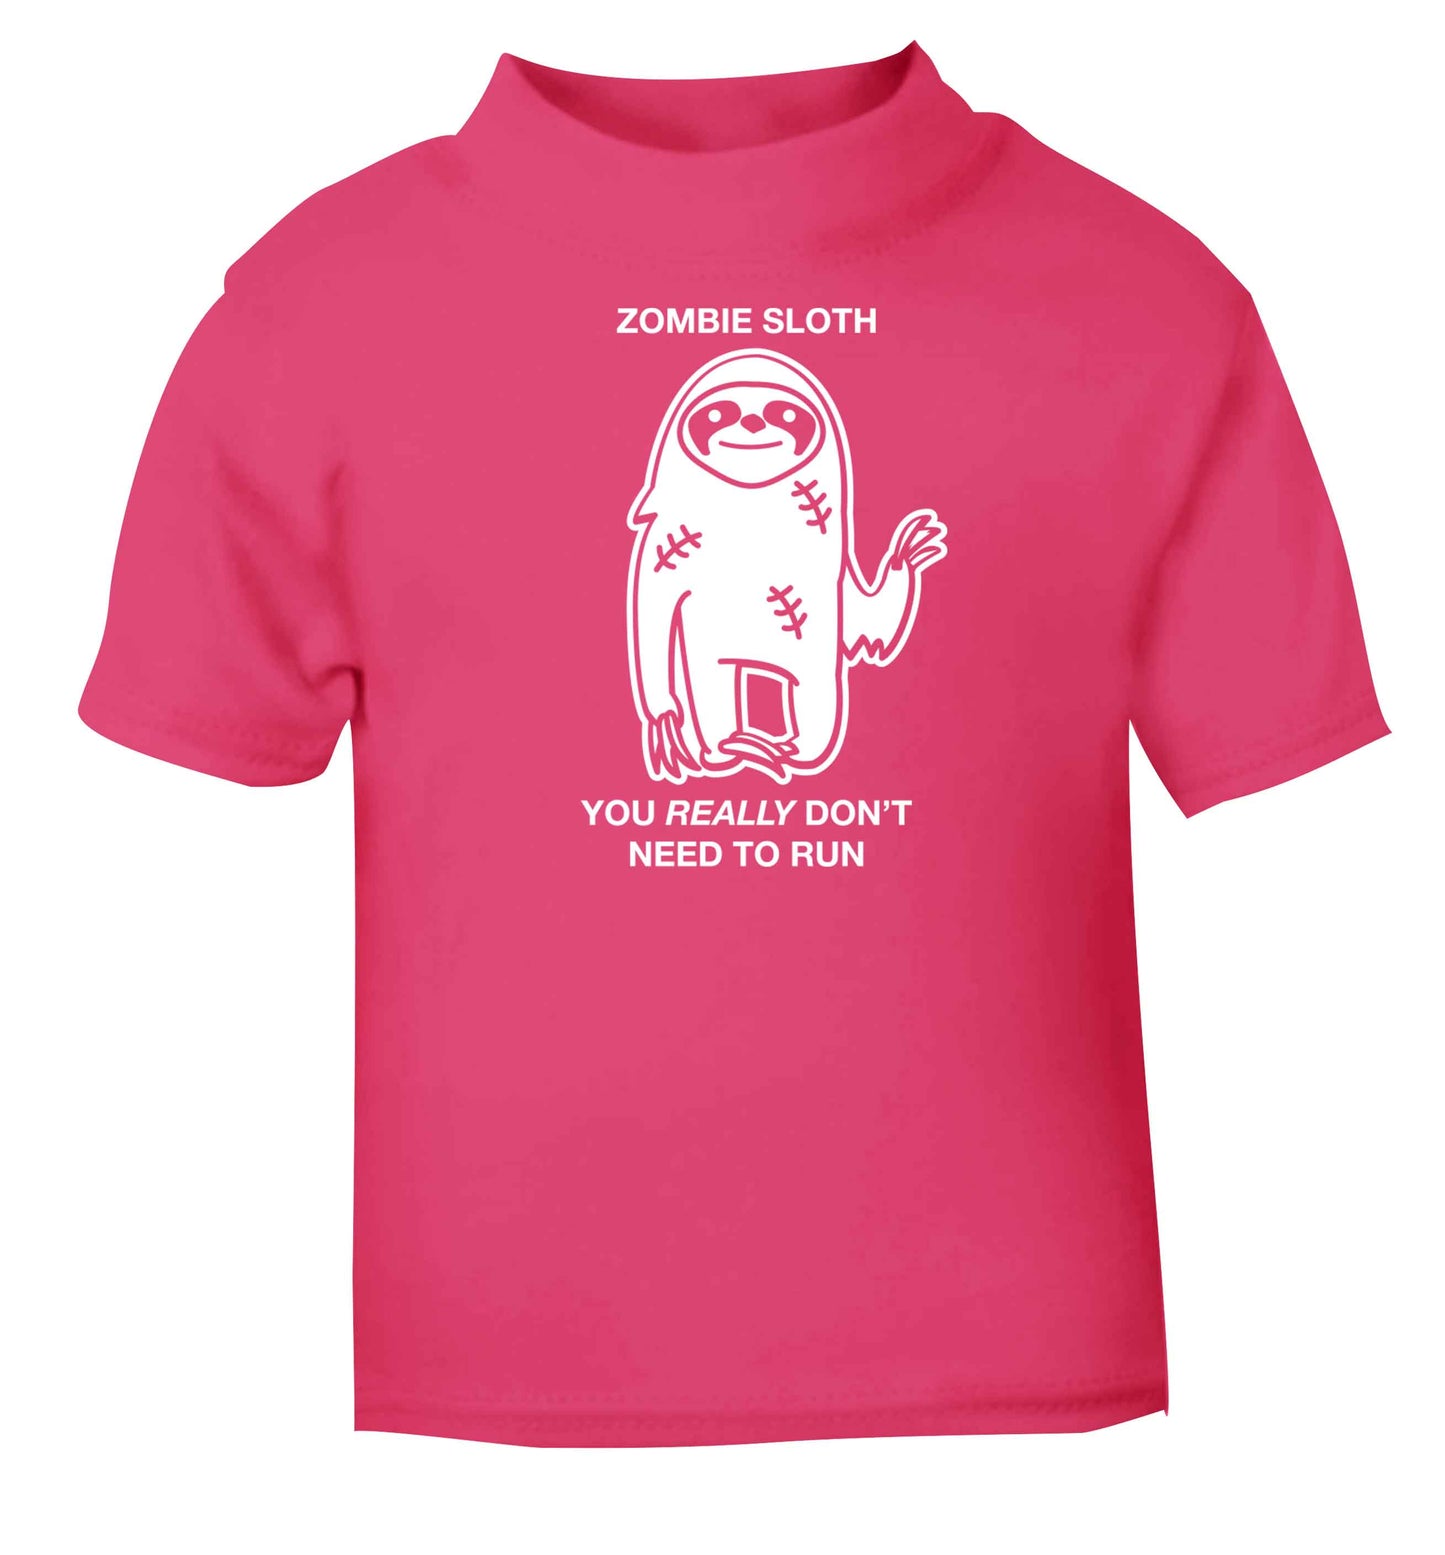 Zombie sloth you really don't need to run pink baby toddler Tshirt 2 Years